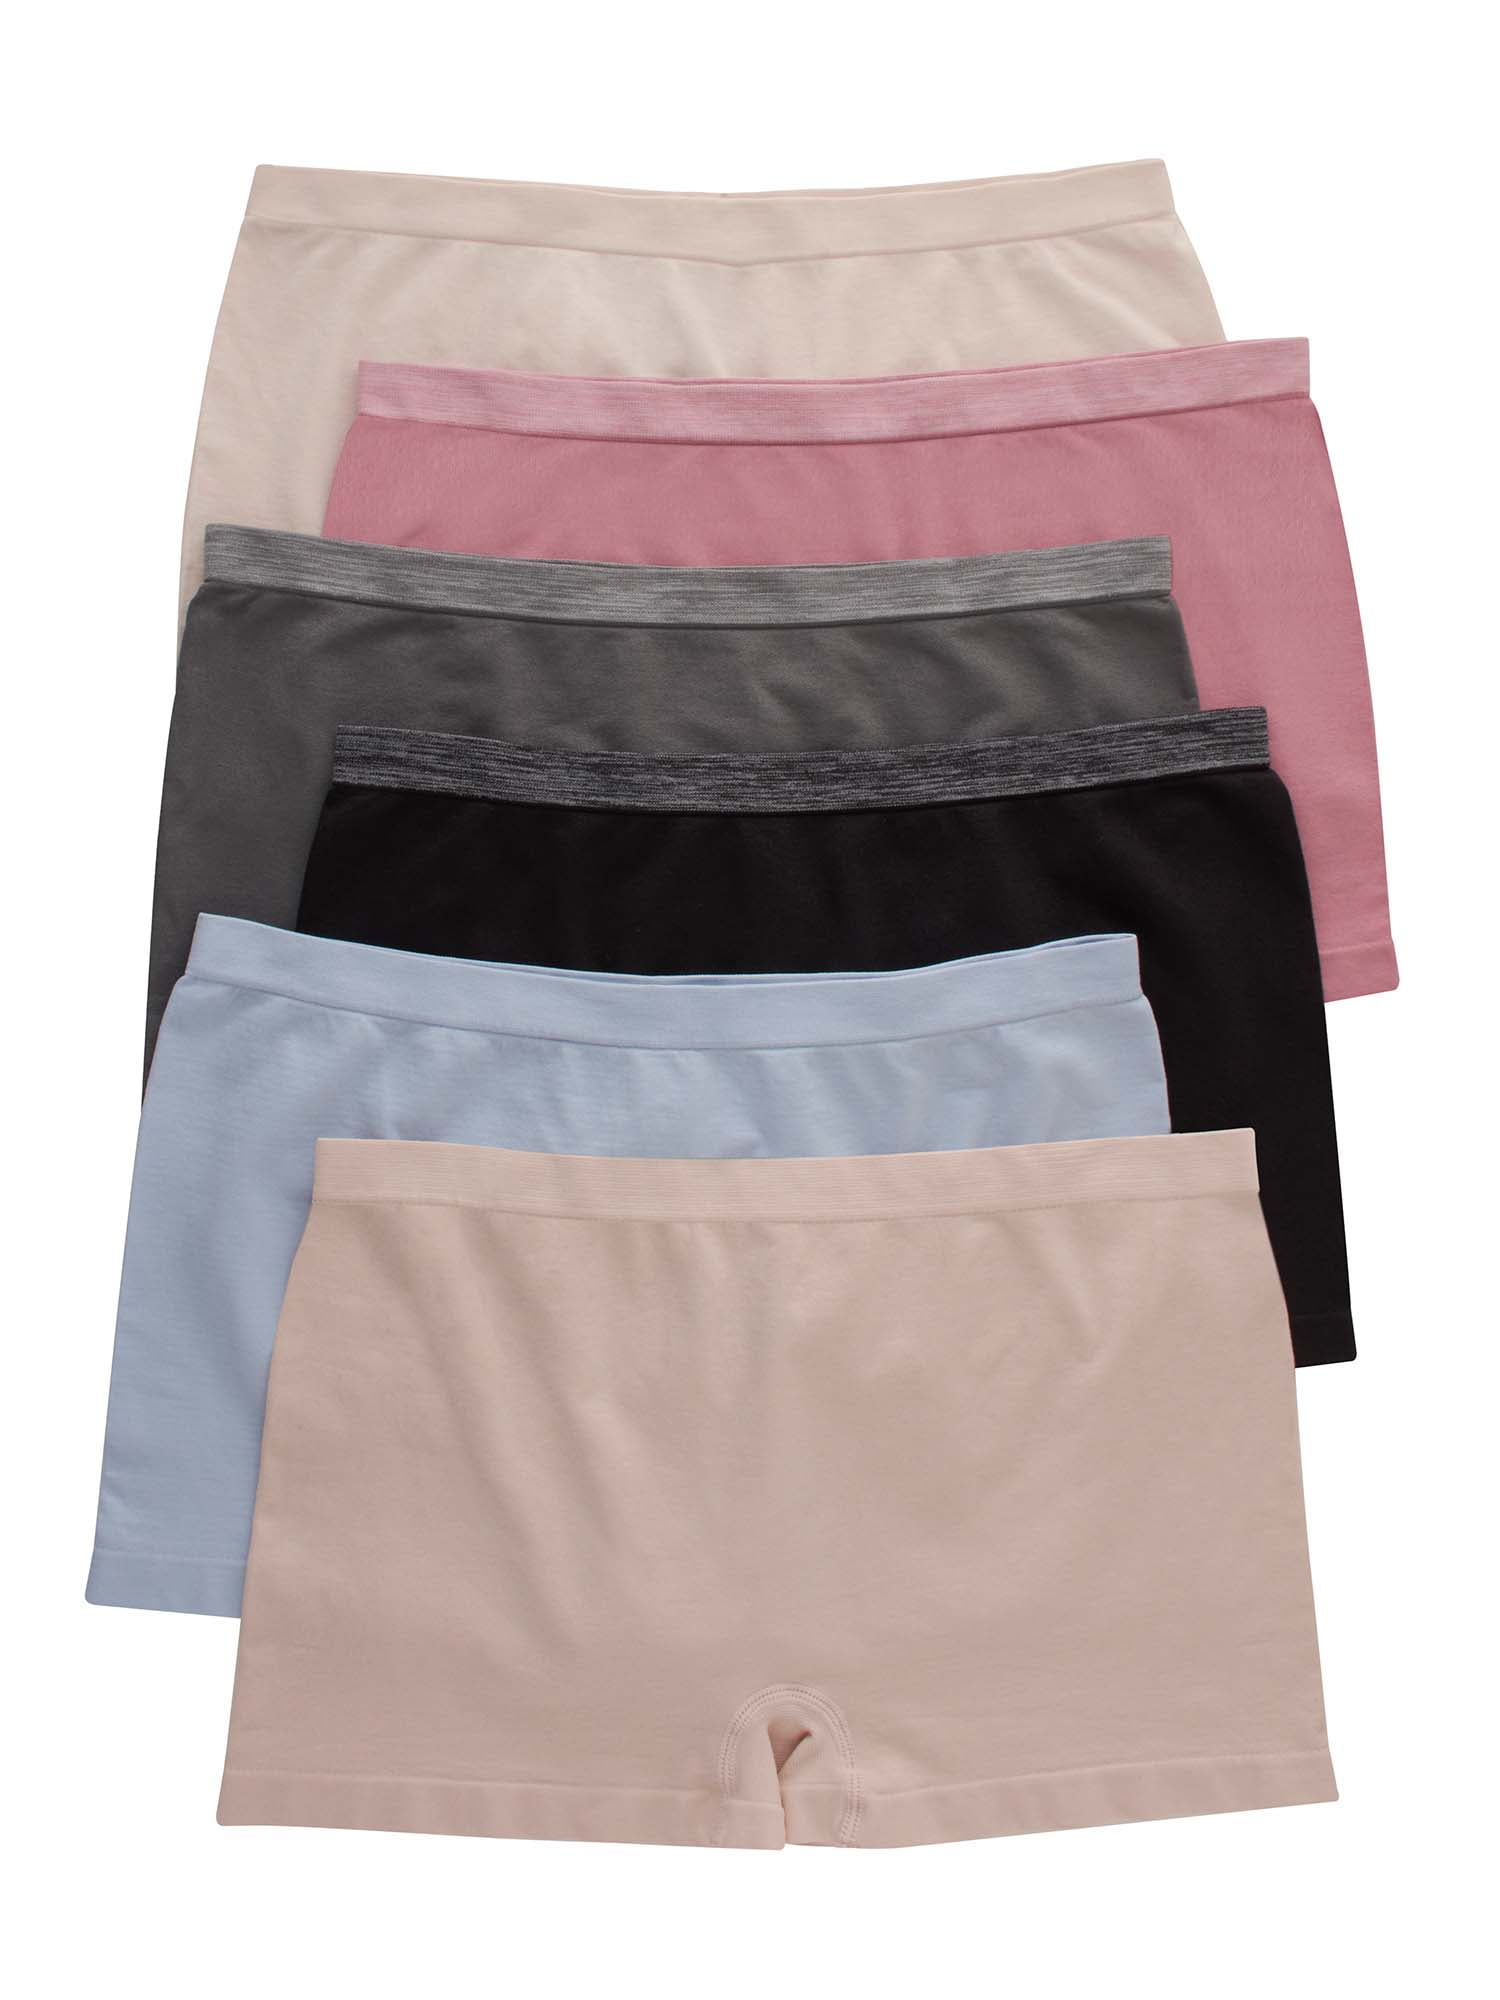 Hanes Womens ComfortSoft Waisband Boy Briefs - Size 8 Colors May